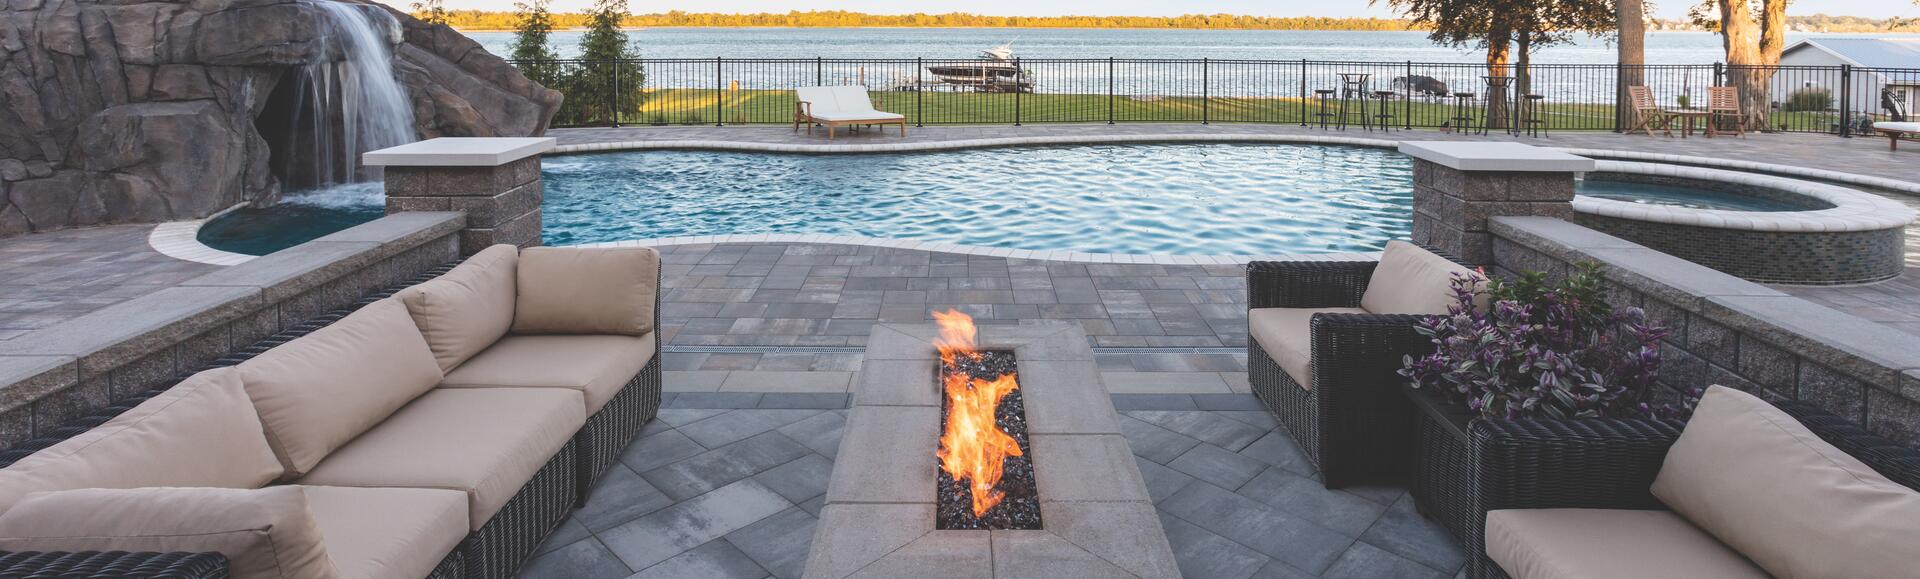 Patio with pool using Molina and Ortana products from Oaks 